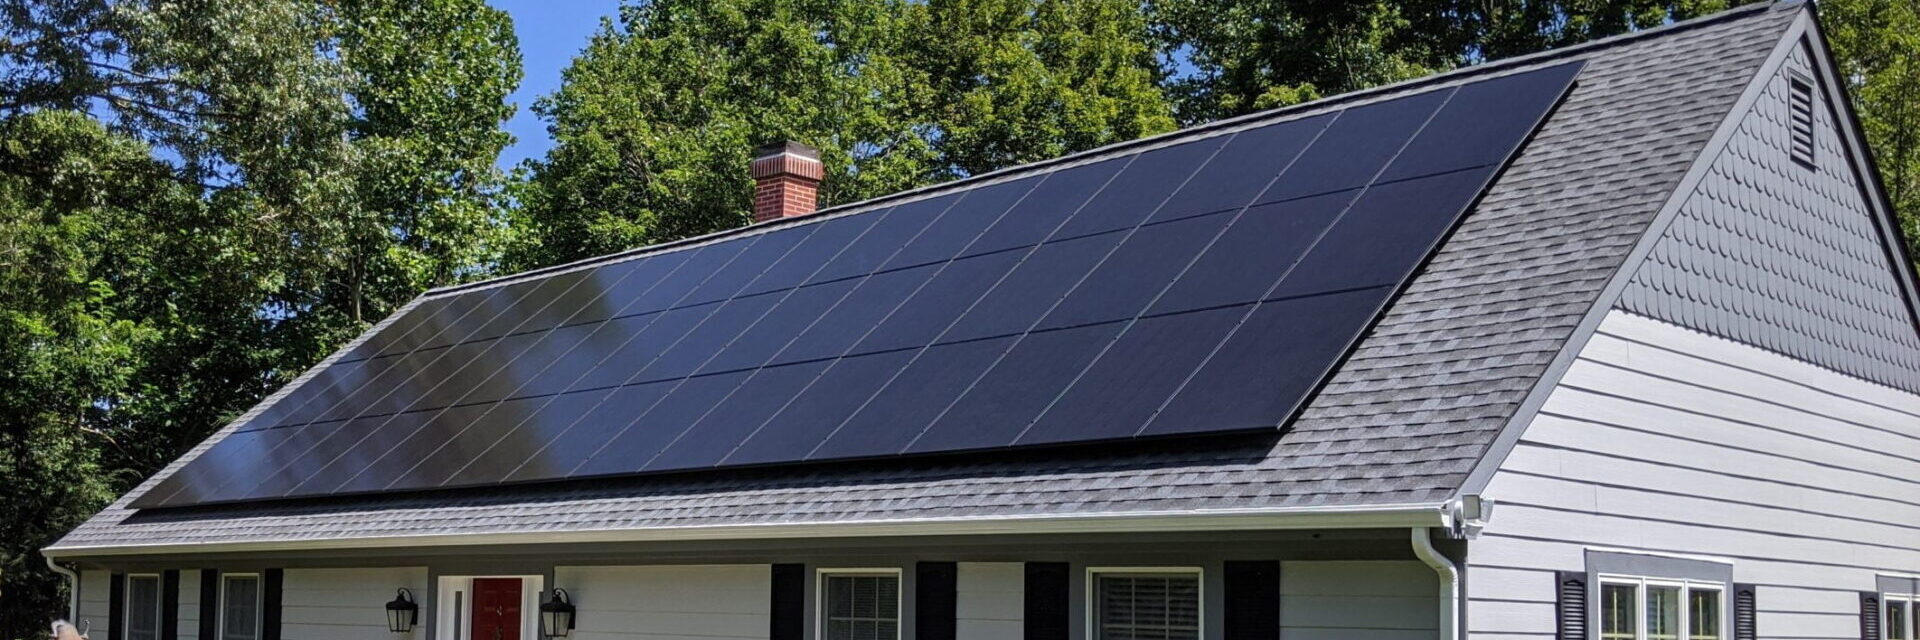 Modern solar panels installed on home rooftop in Ruckersville, Greene County, Virginia